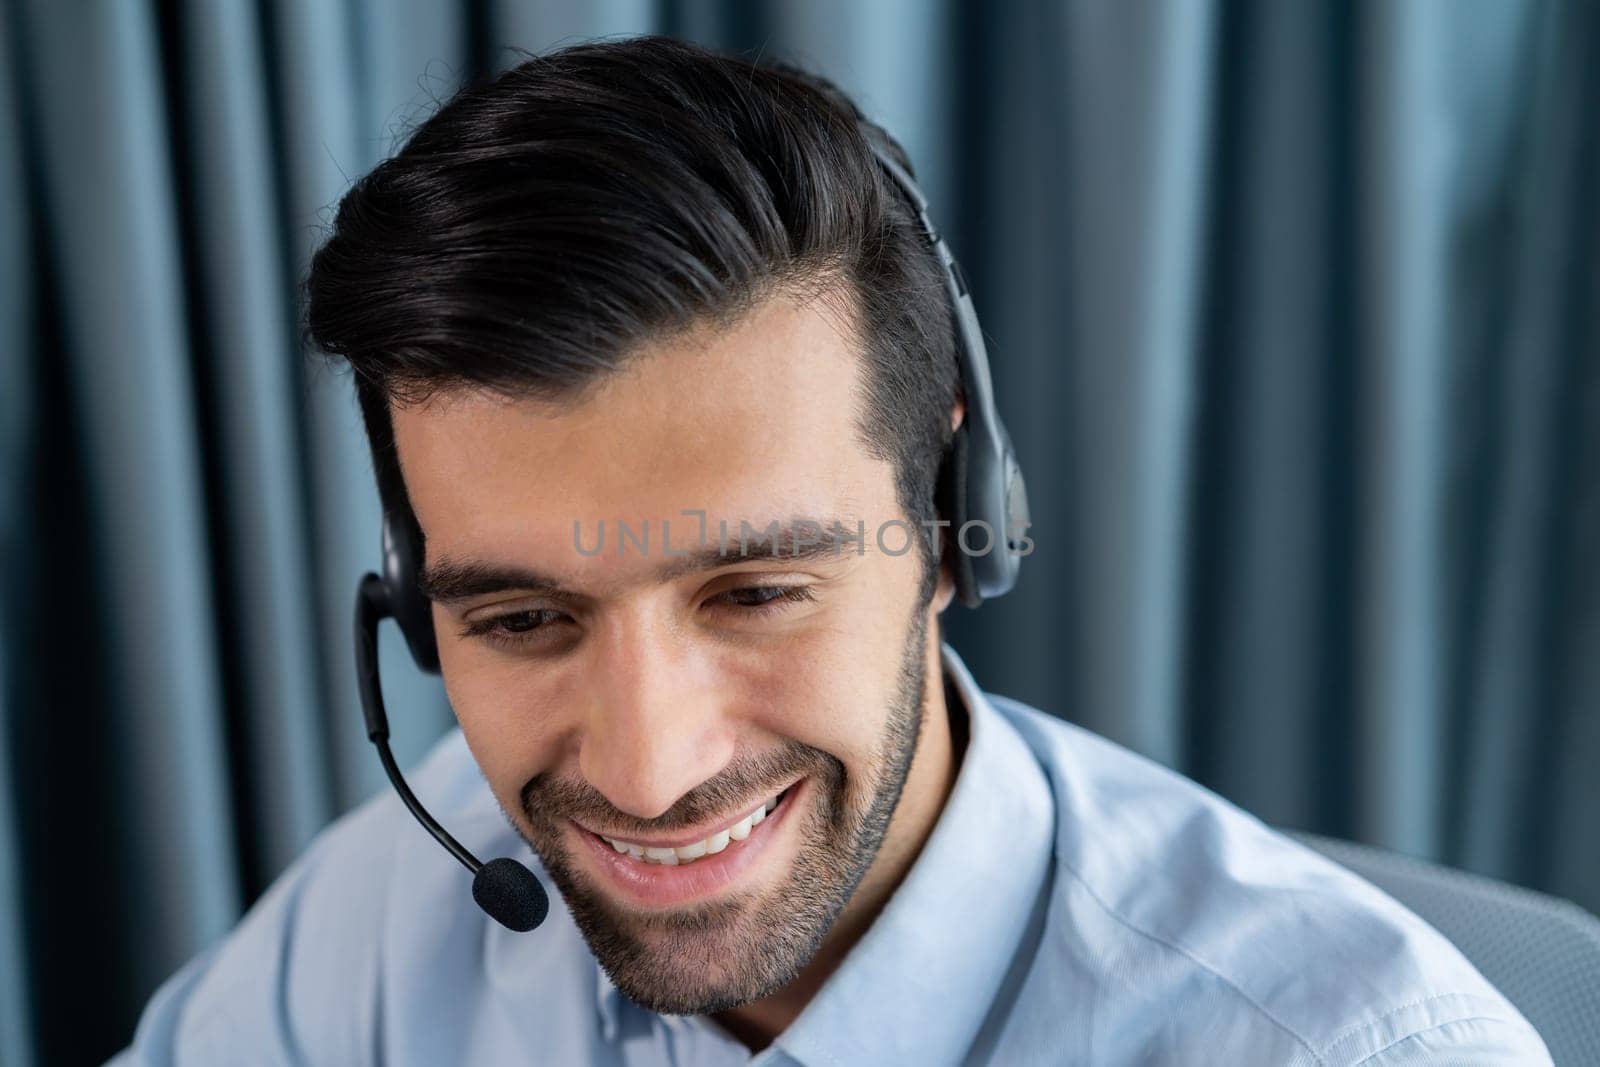 Male call center operator or telesales agent portrait. fervent by biancoblue